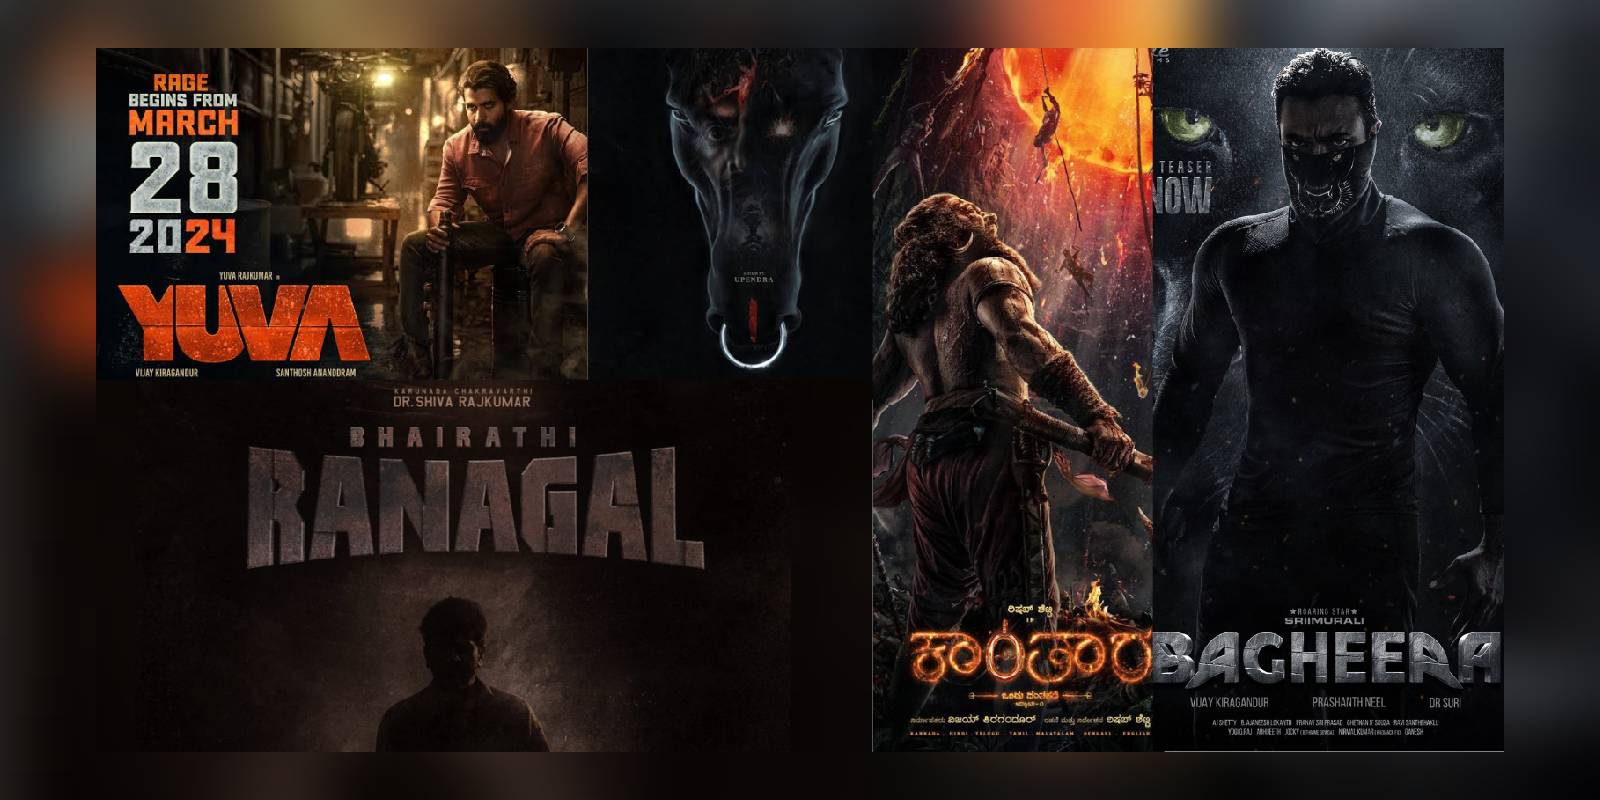 Pan India films from Kannada film industry in 2024